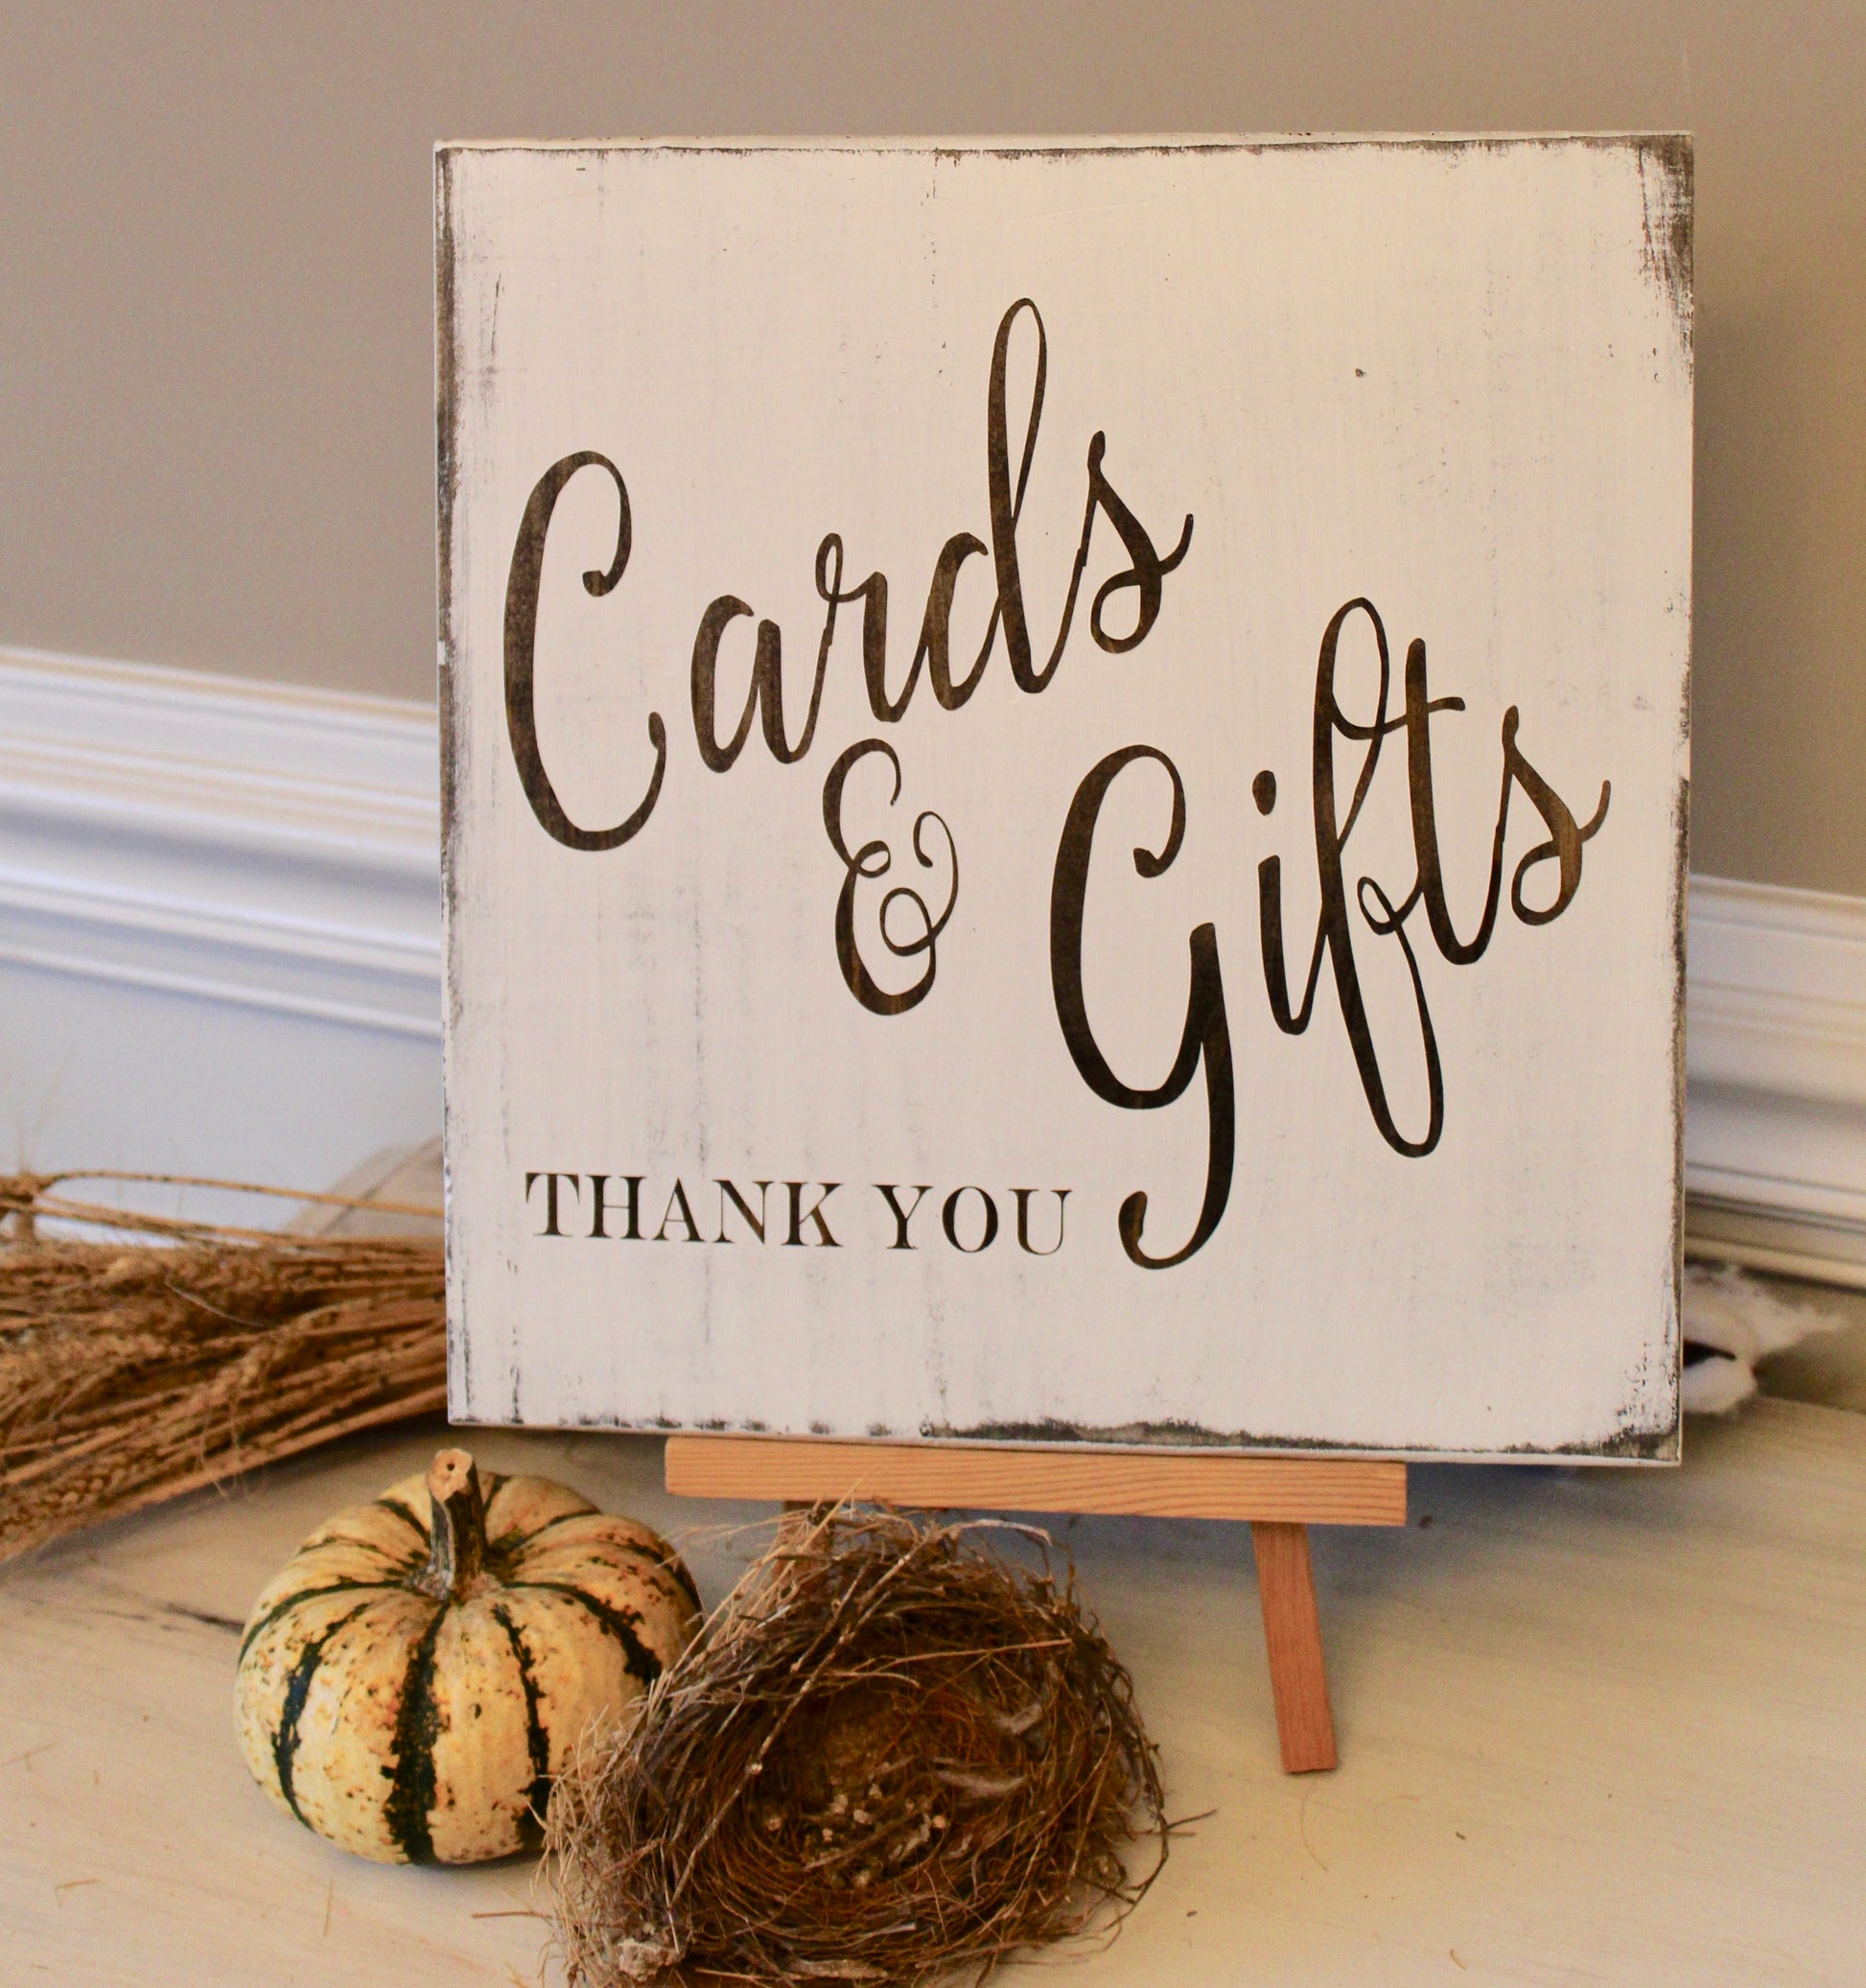 cards & gifts thank you sign